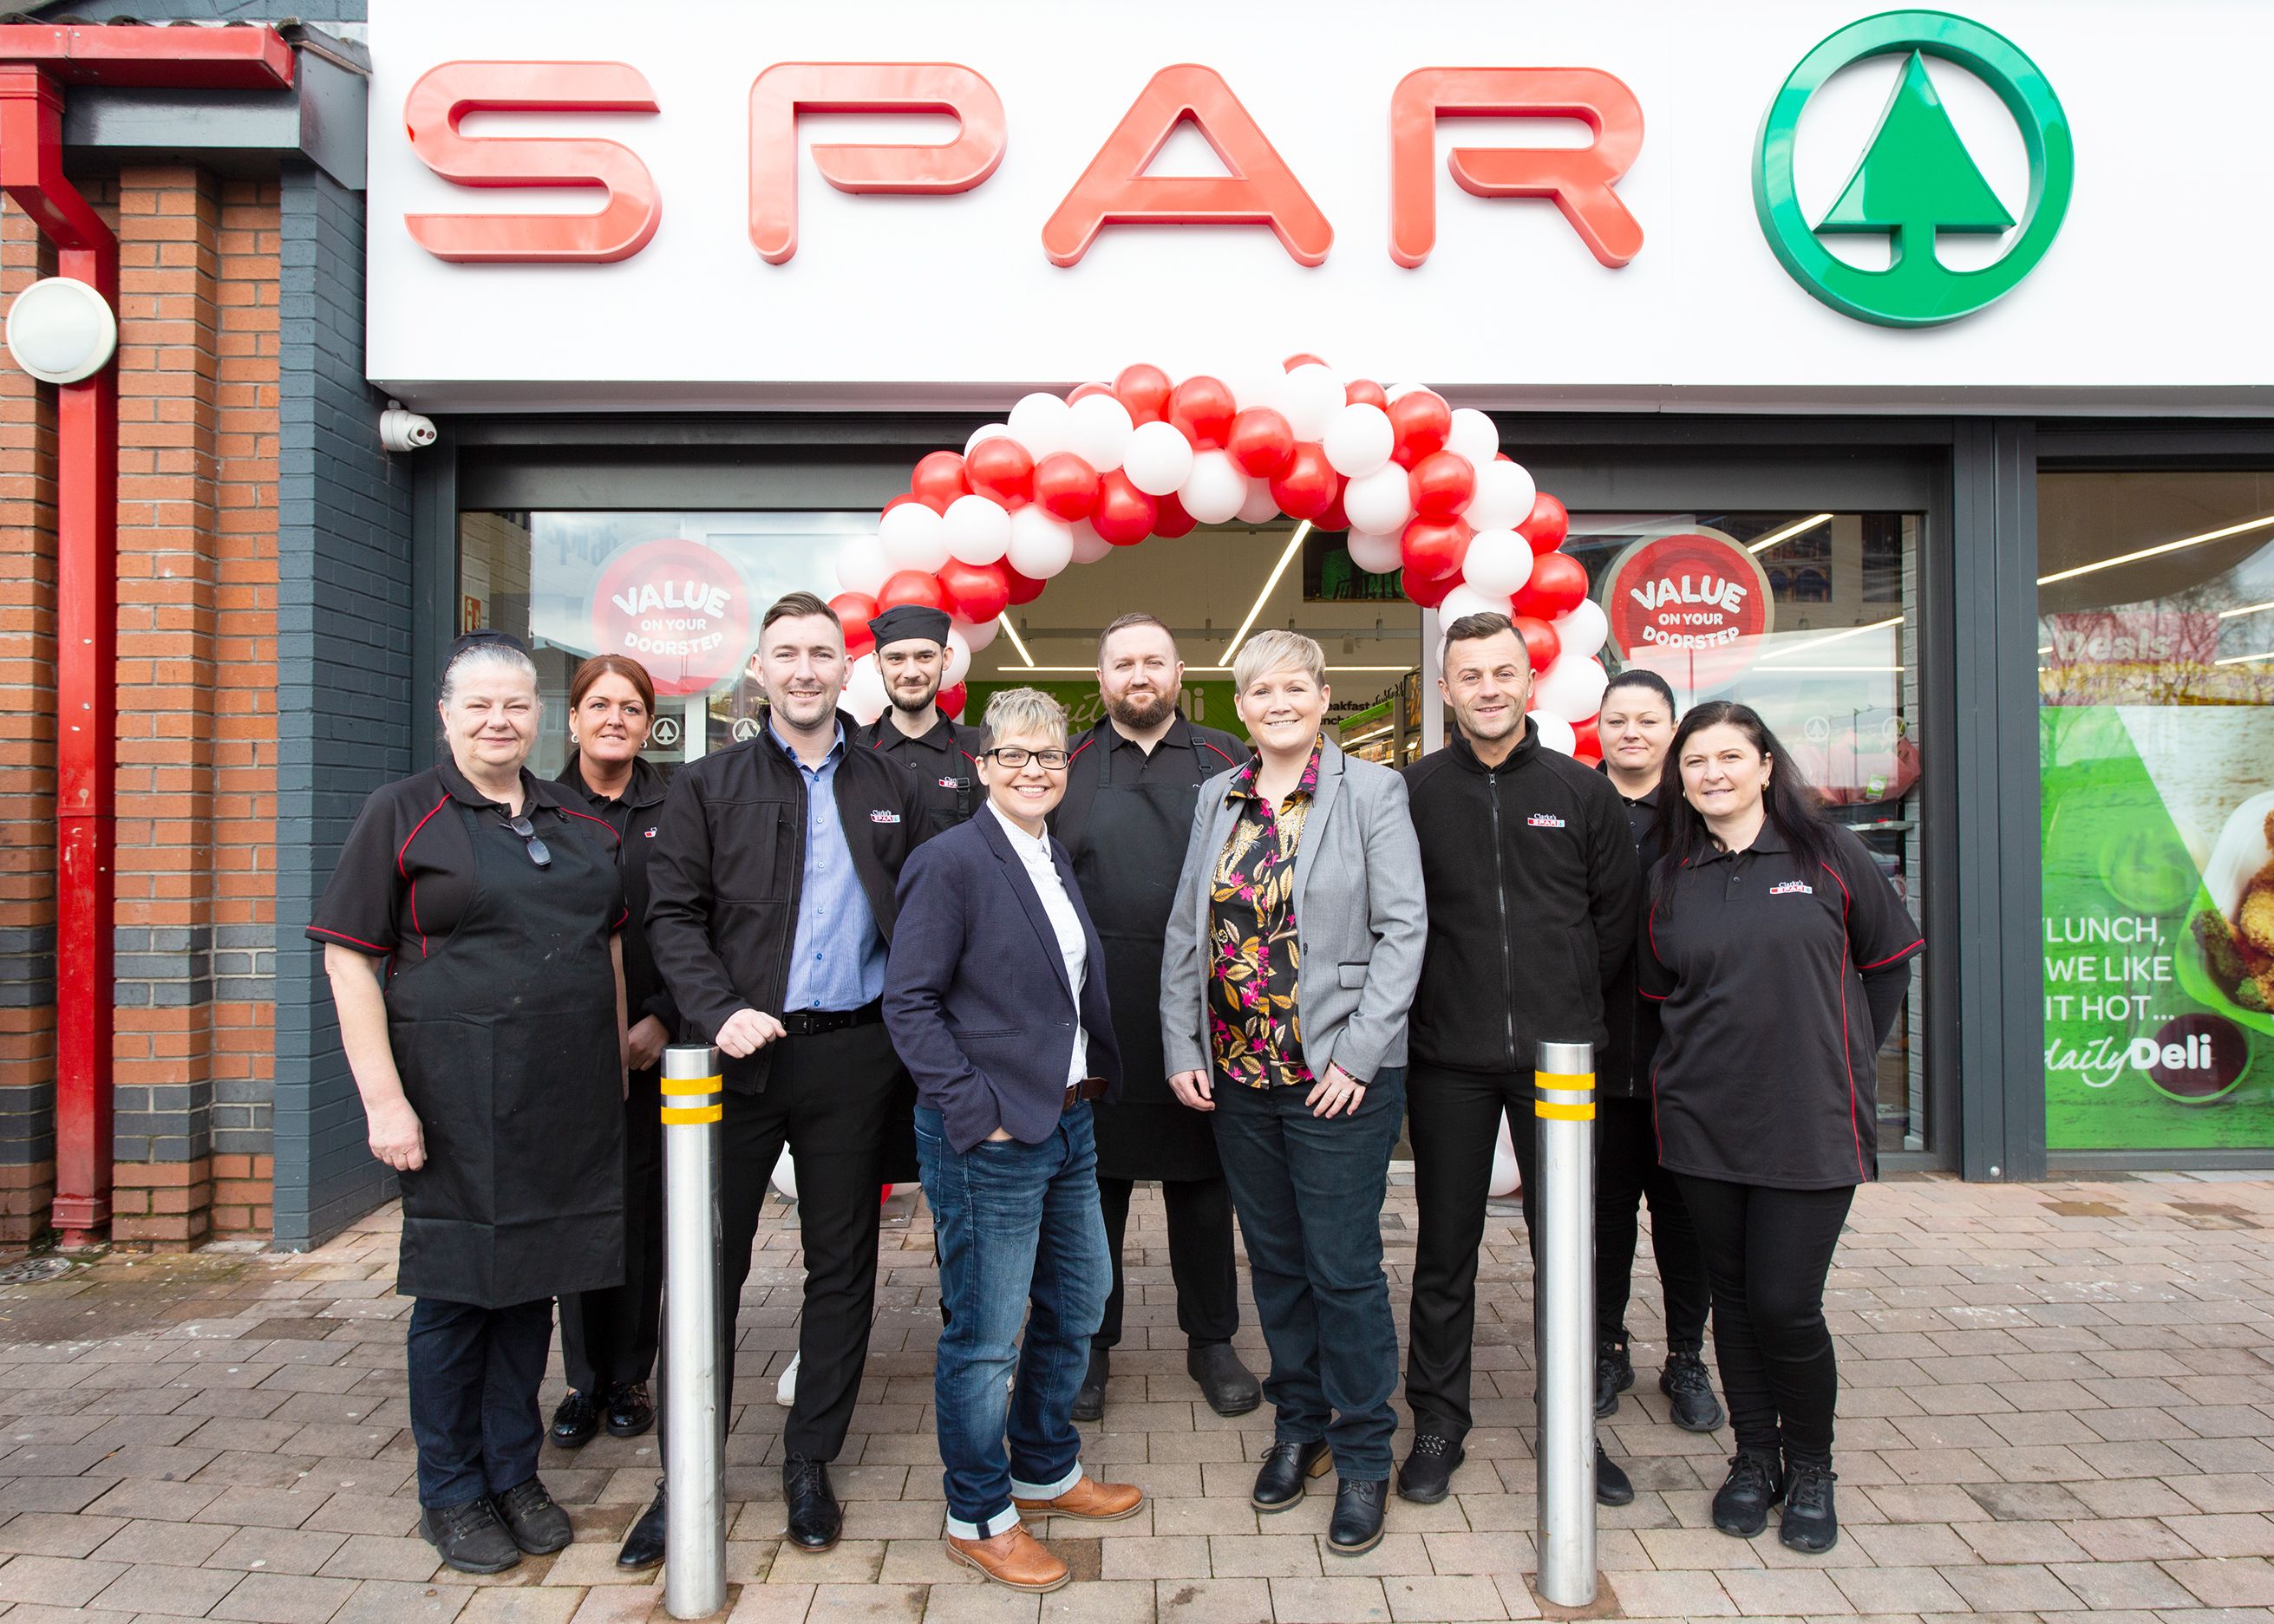 Management and staff of Clarke’s Spar at Twin Spires